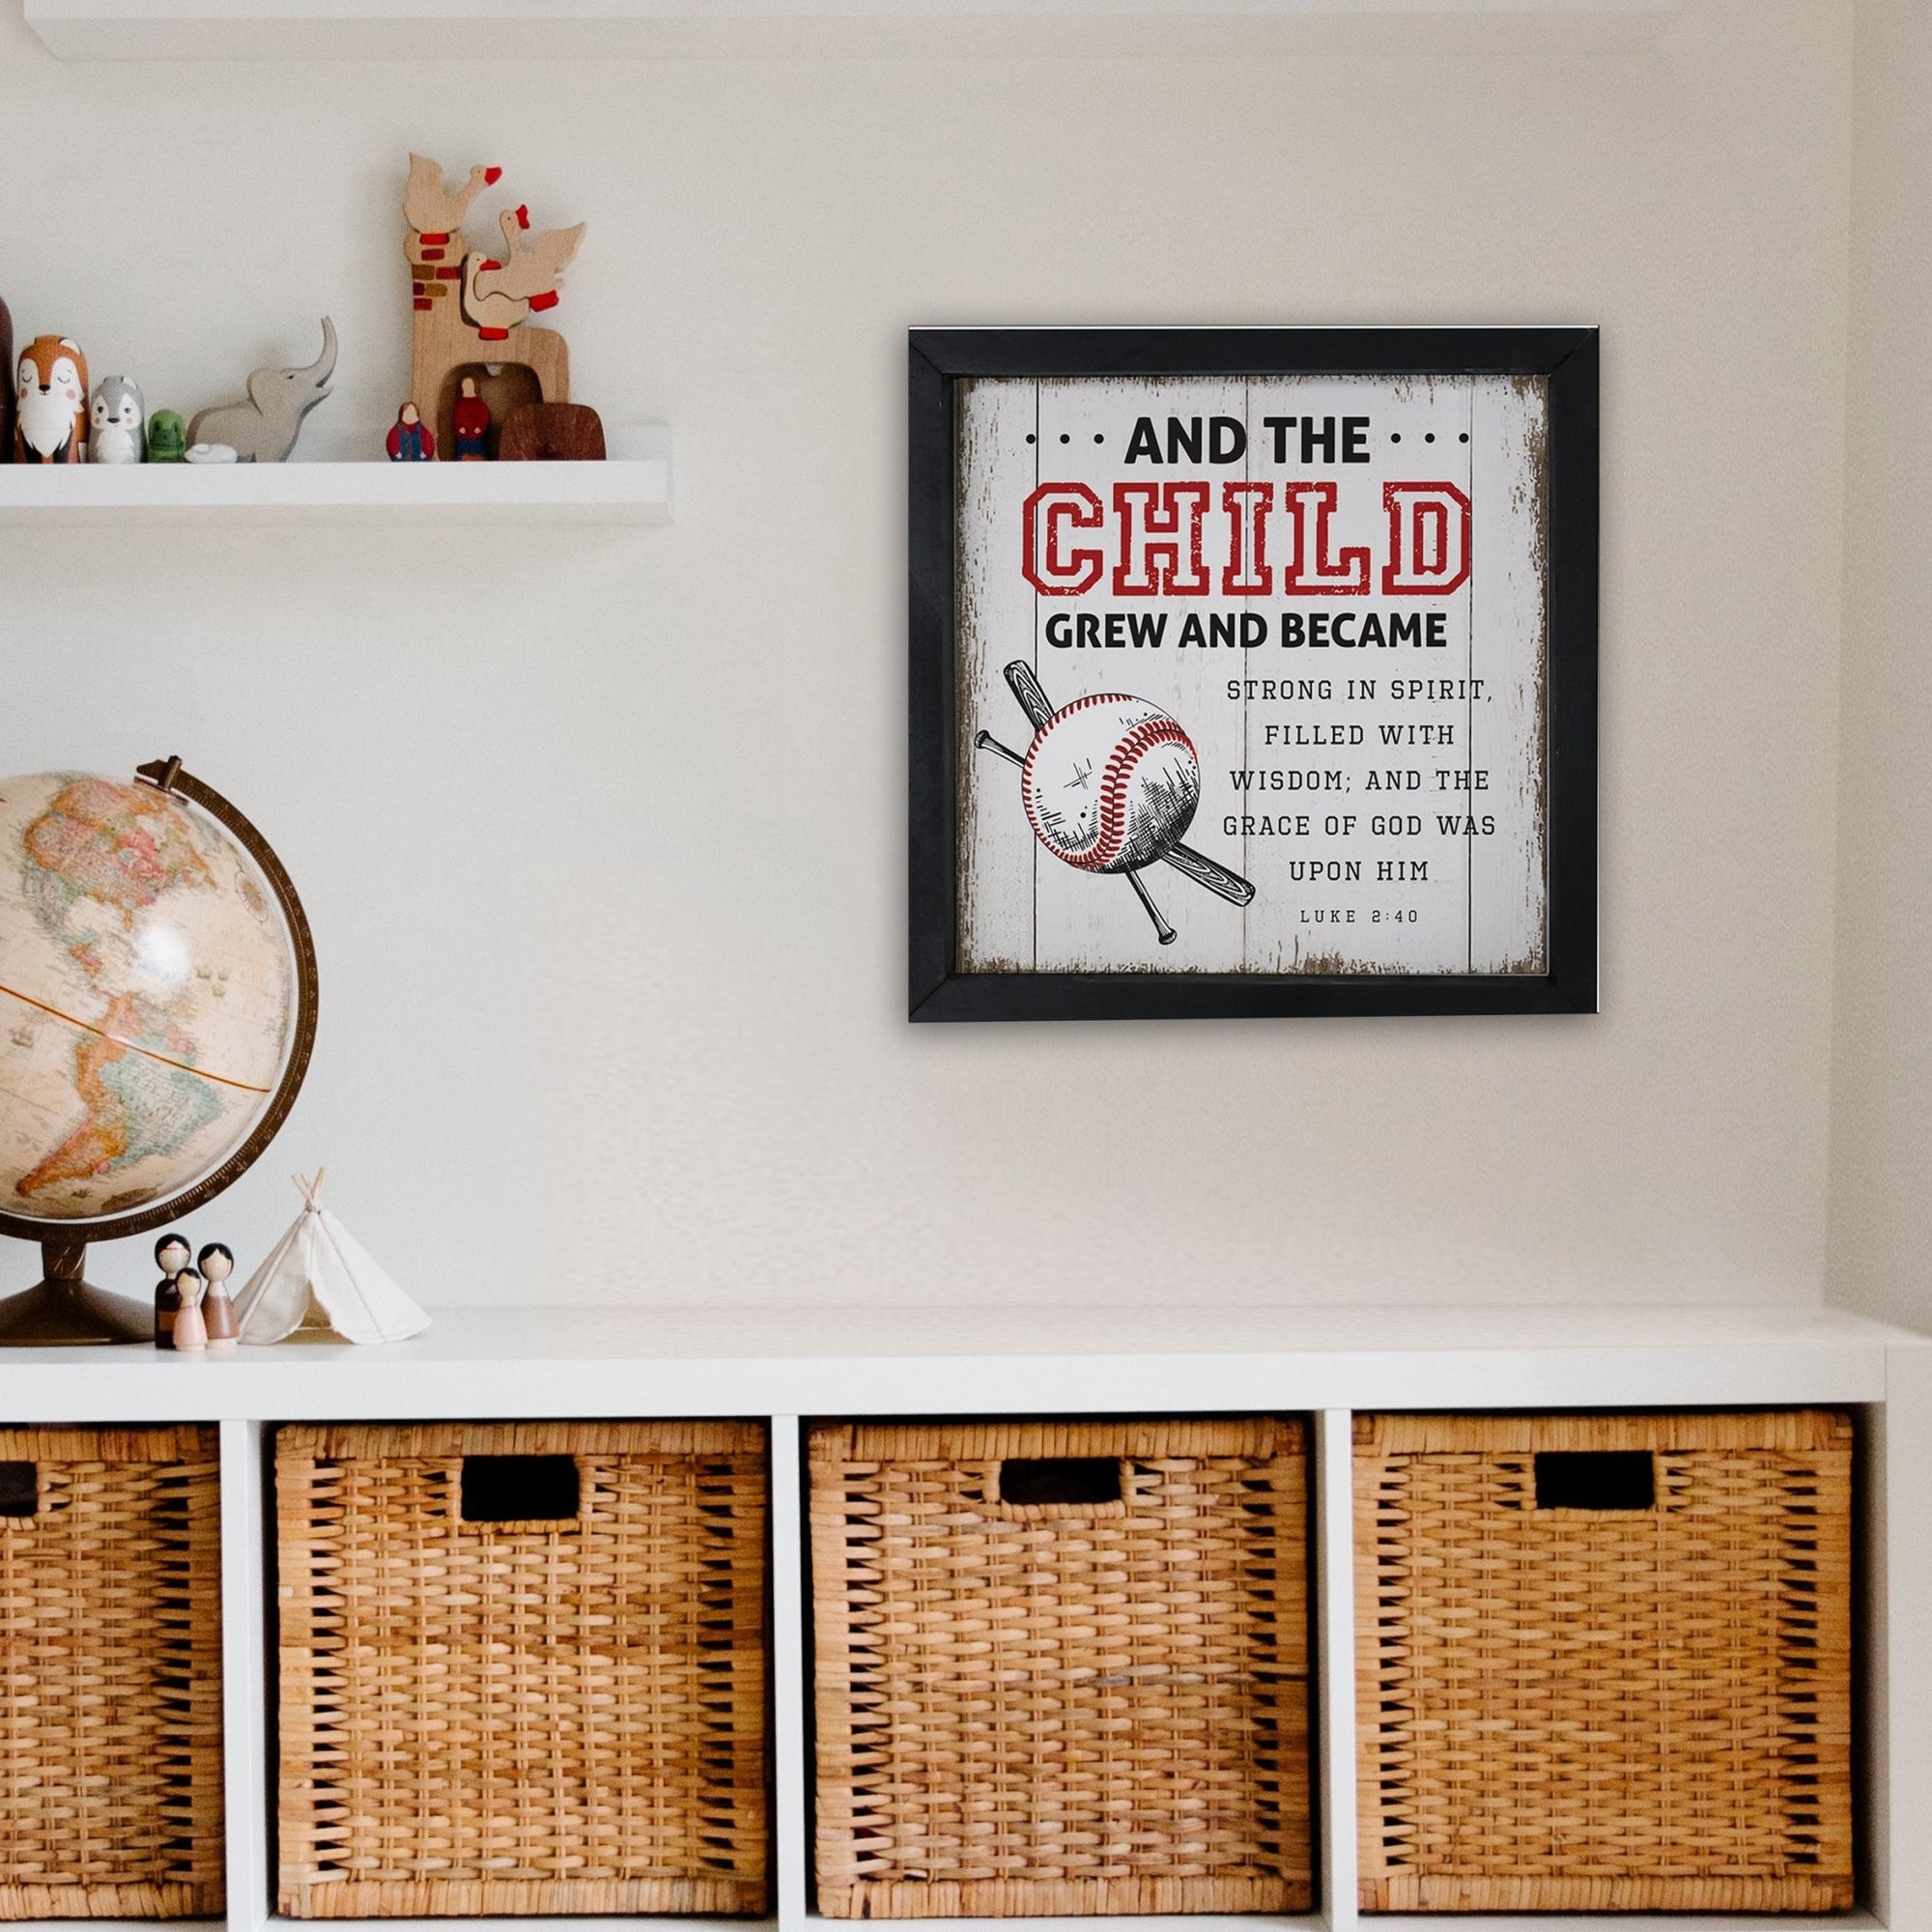 Elegant Baseball Framed Shadow Box Shelf Décor With Inspiring Bible Verses - And The Child Grew - LifeSong Milestones